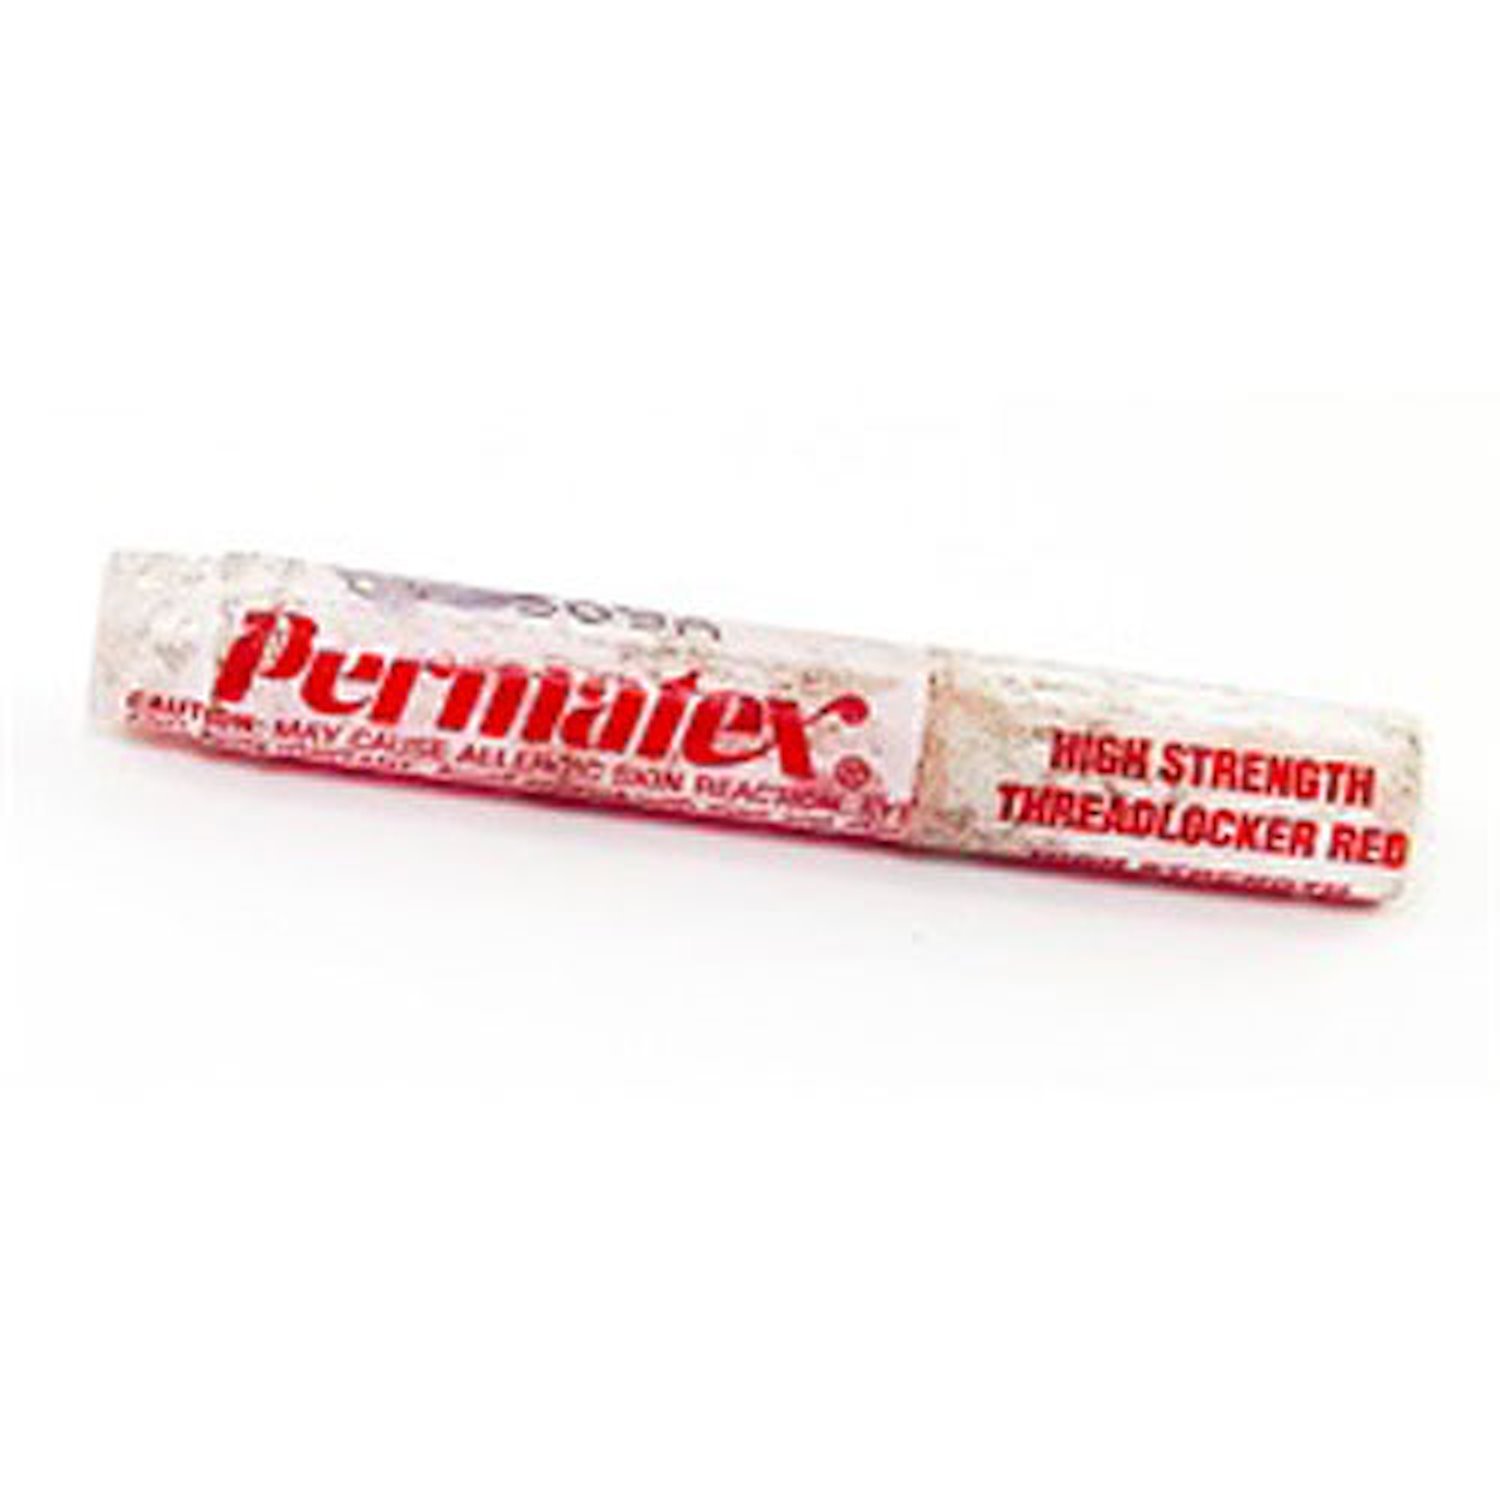 This high-strength red threadlocker from Permatex prevents